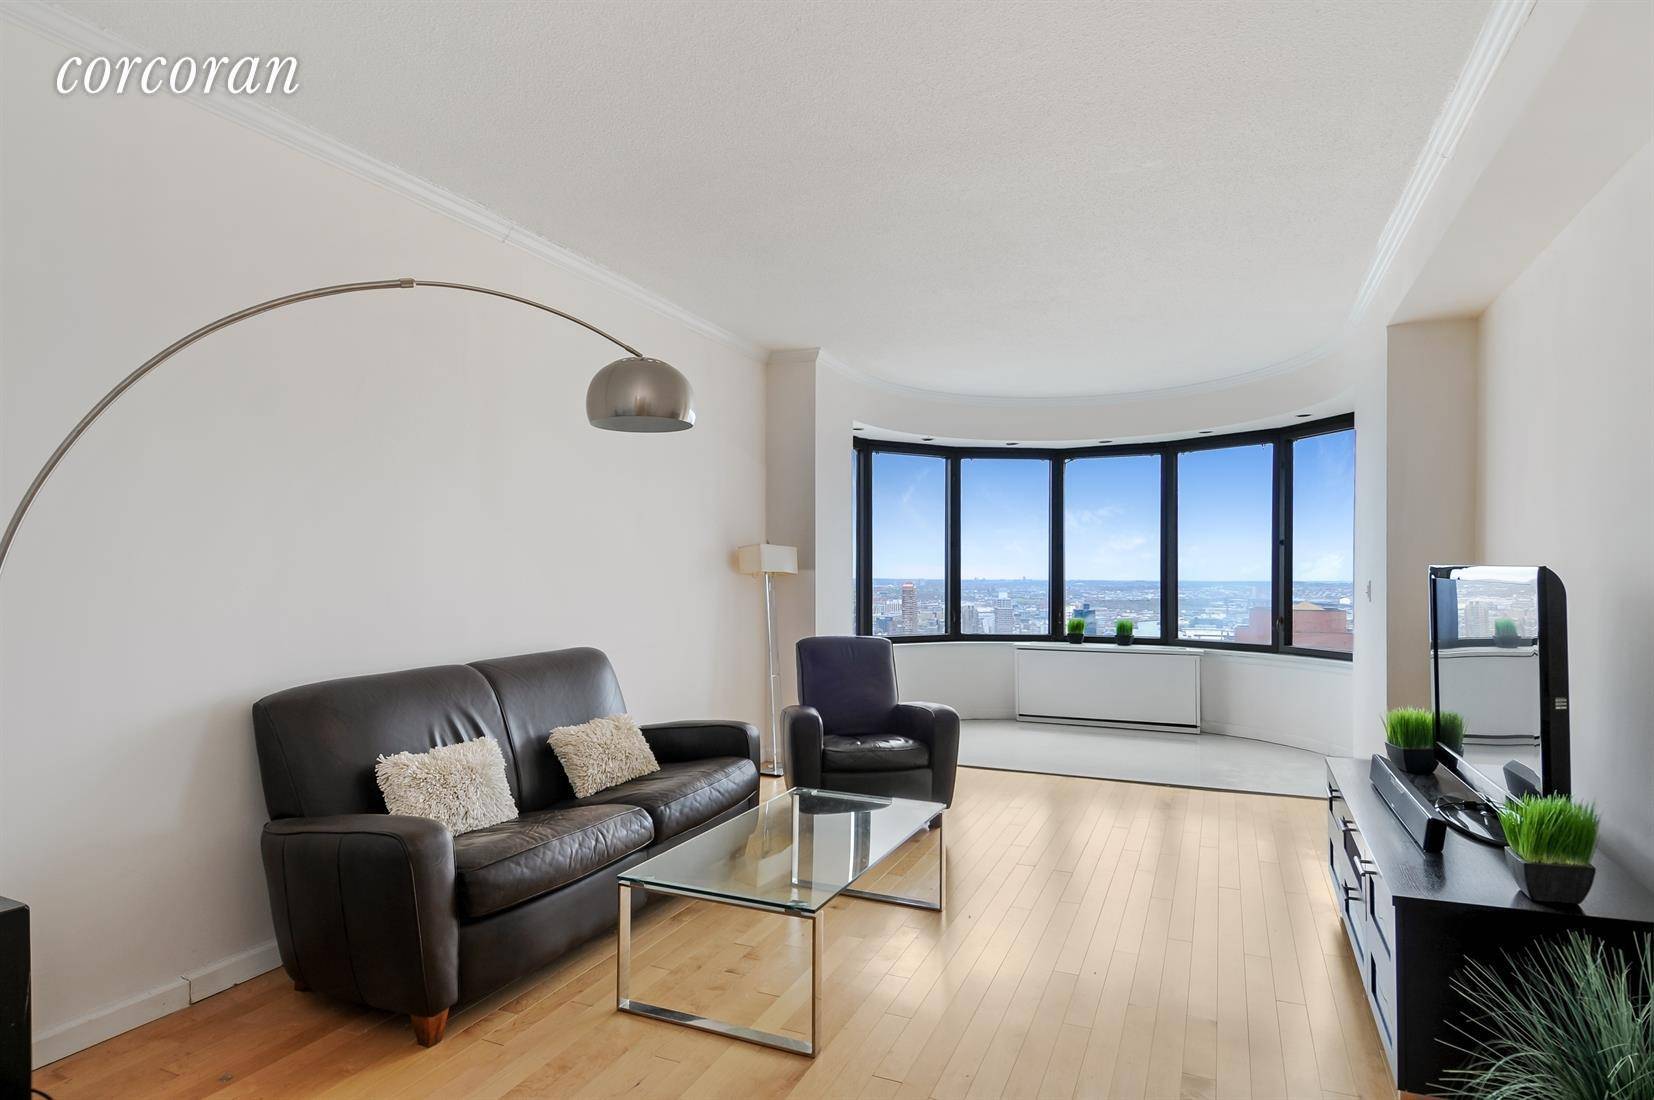 330 E 38th St Apt 51J NY NY 10016 Murray Hill, Corinthian Condominiums Move right into this Spectacular One bedroom, One bathroom Condo with direct unobstructed East River and Manhattan ...